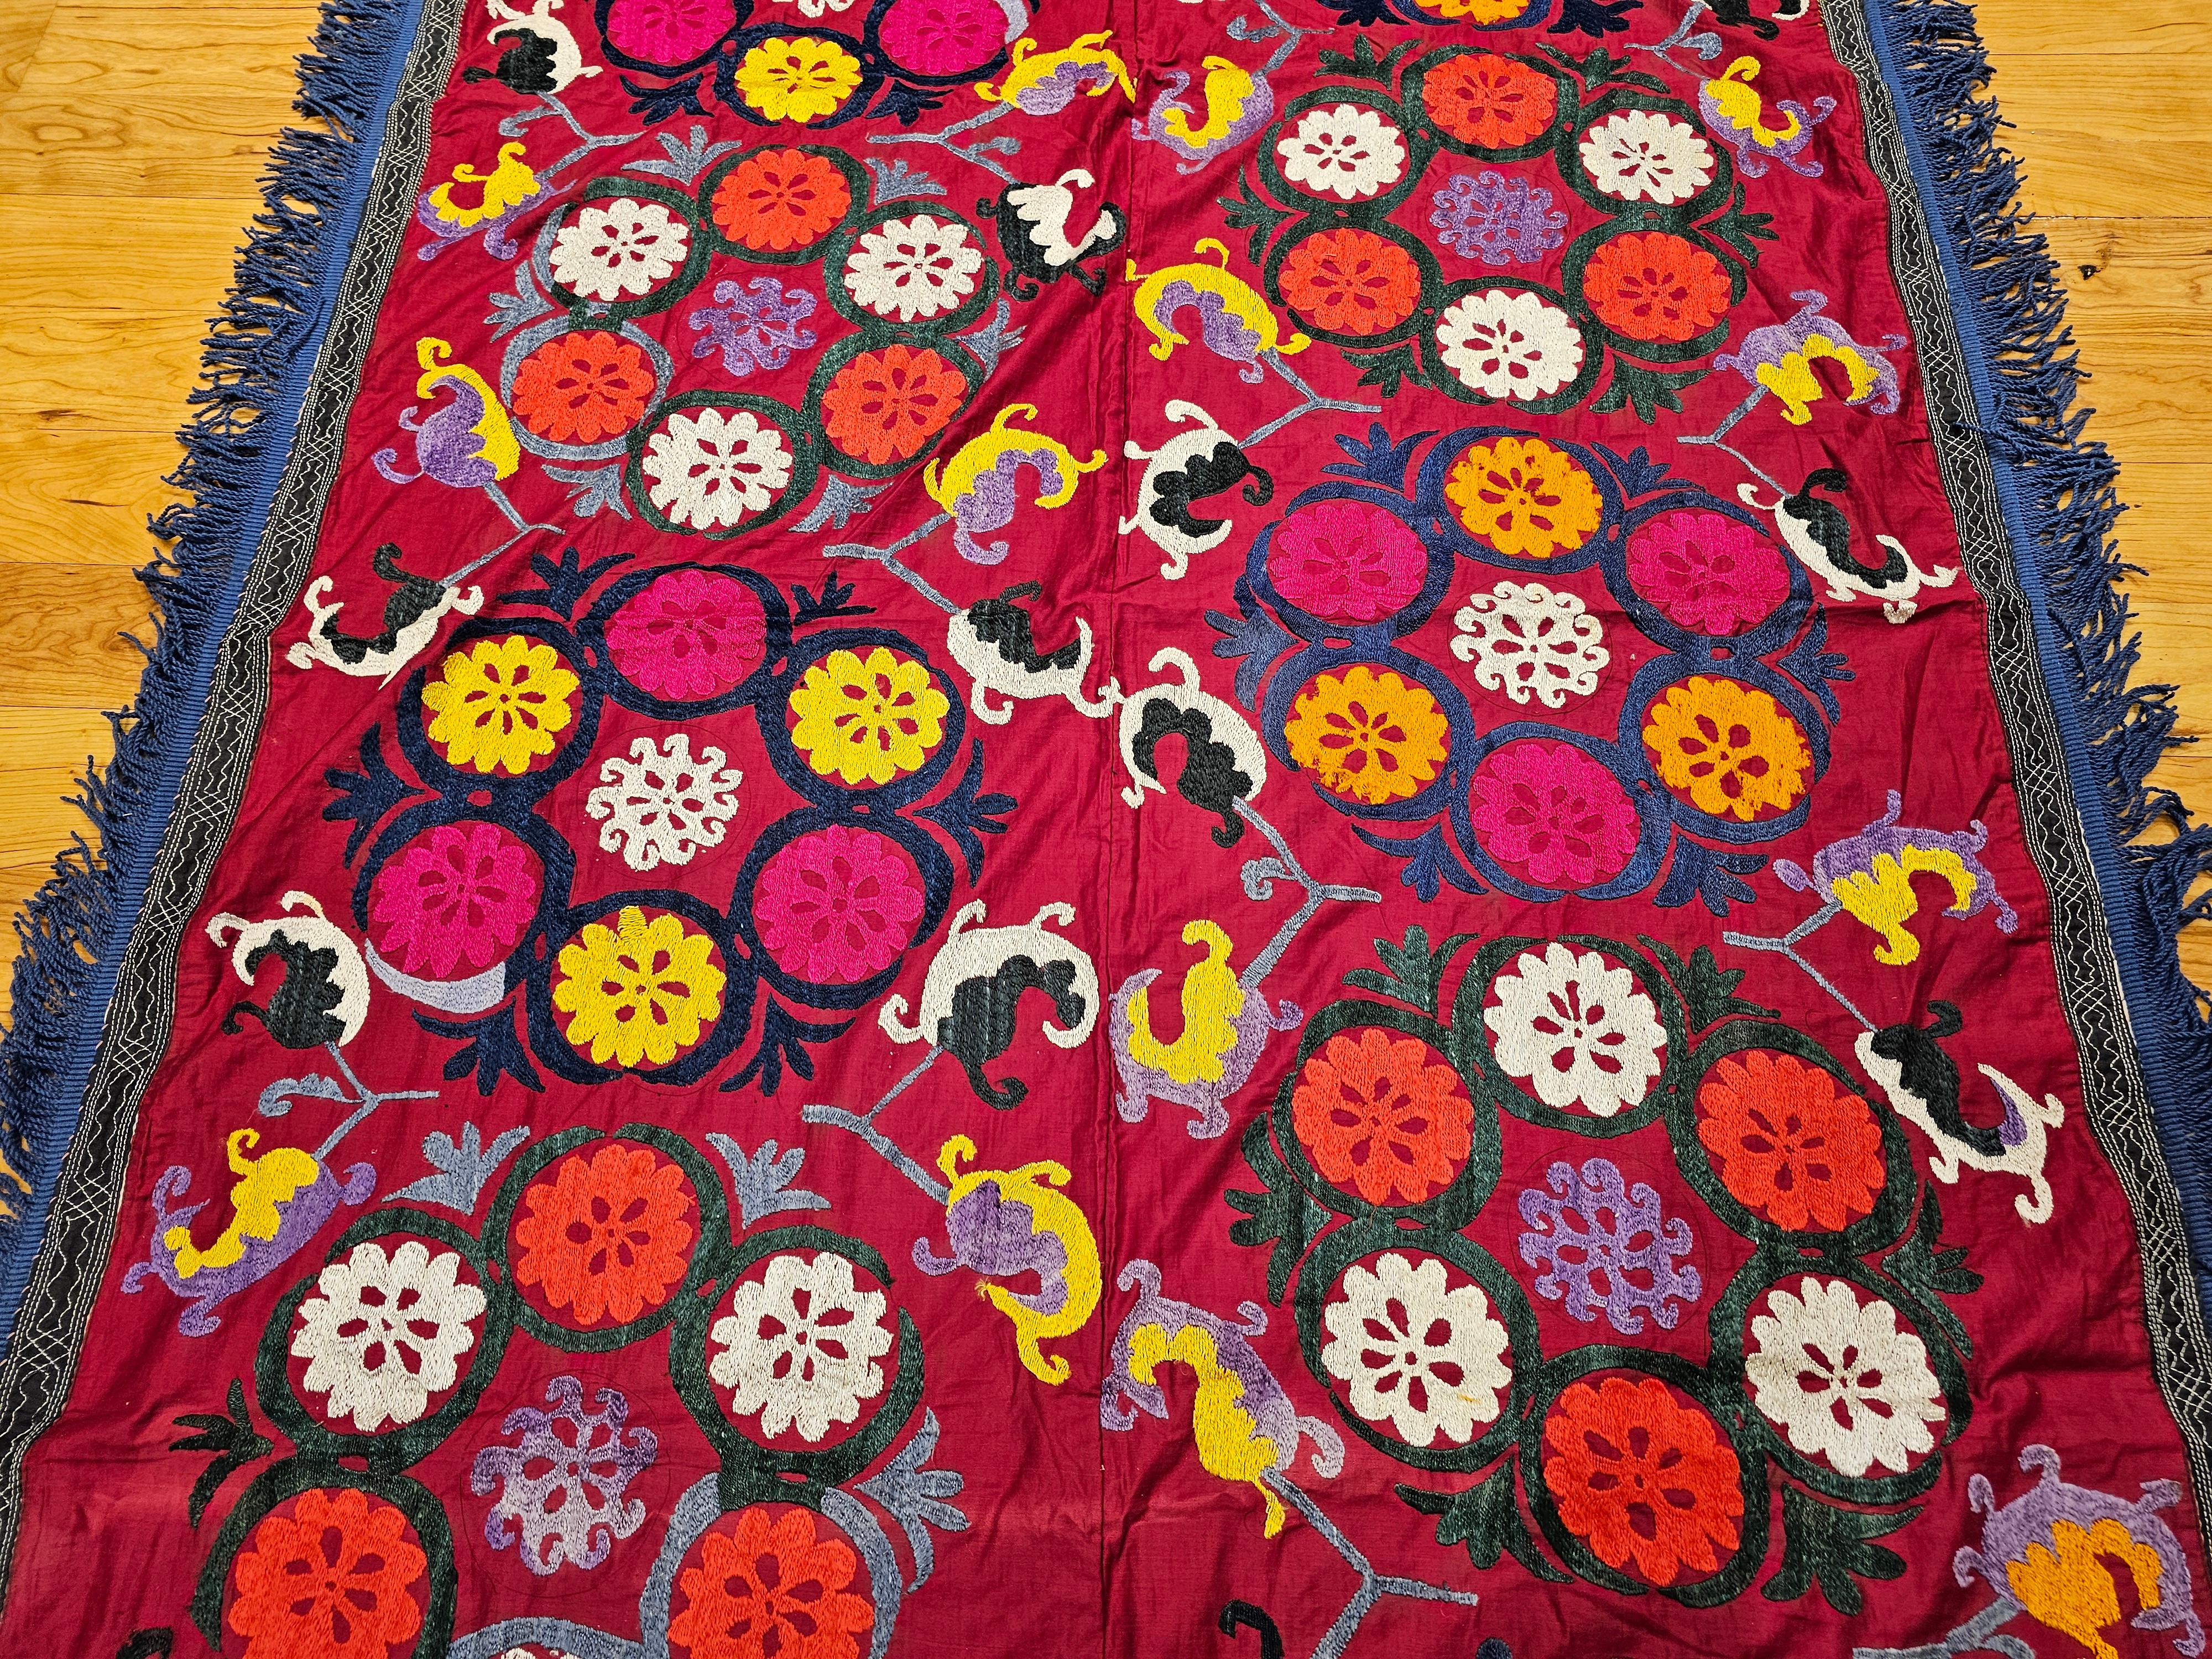 Vintage Uzbek Suzani Silk Embroidery in Red, Ivory, Blue, Yellow, Black, Purple In Good Condition For Sale In Barrington, IL